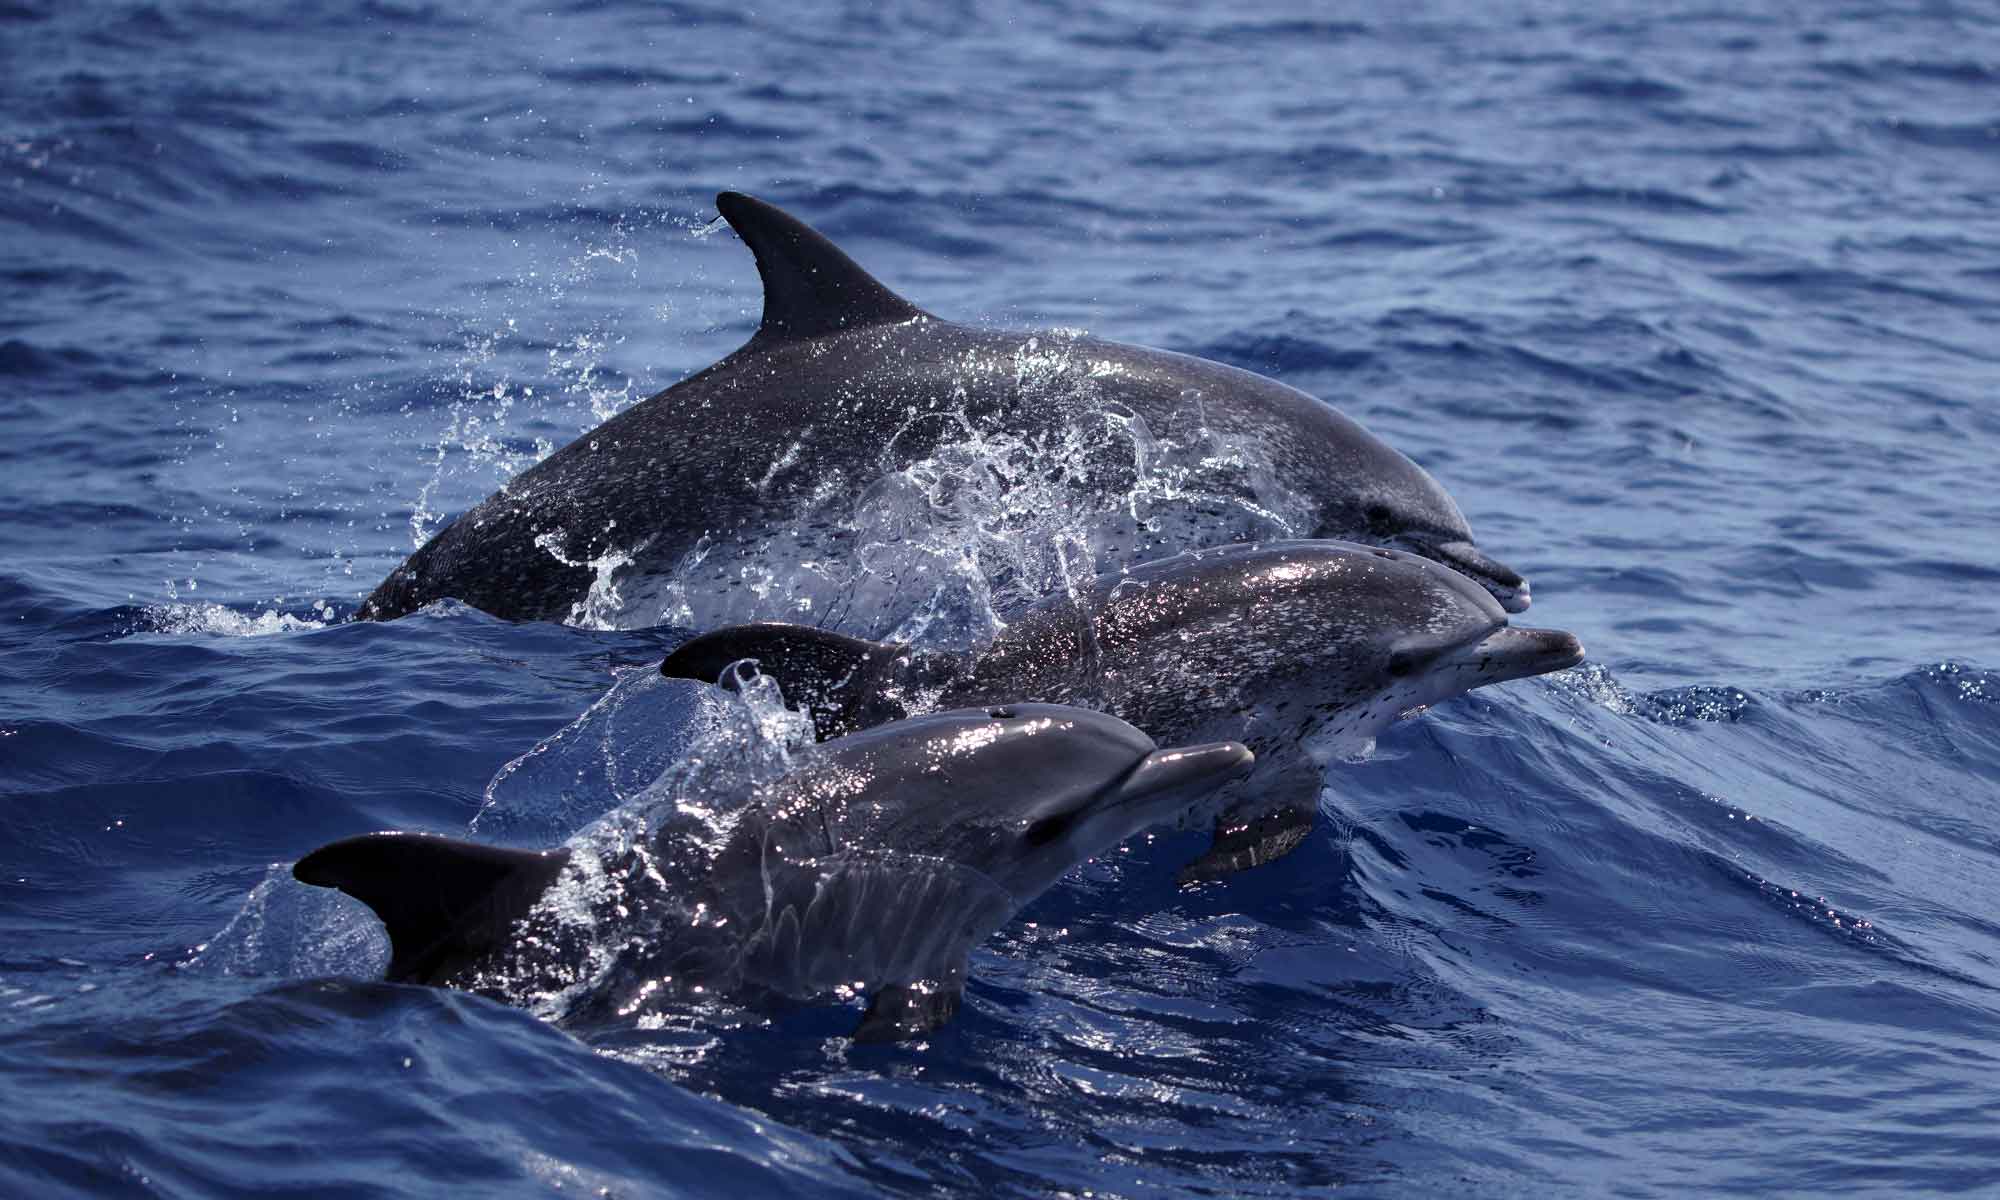 The Atlantic Spotted dolphin is a seasonal visitor to Madeira and common during the summer months.